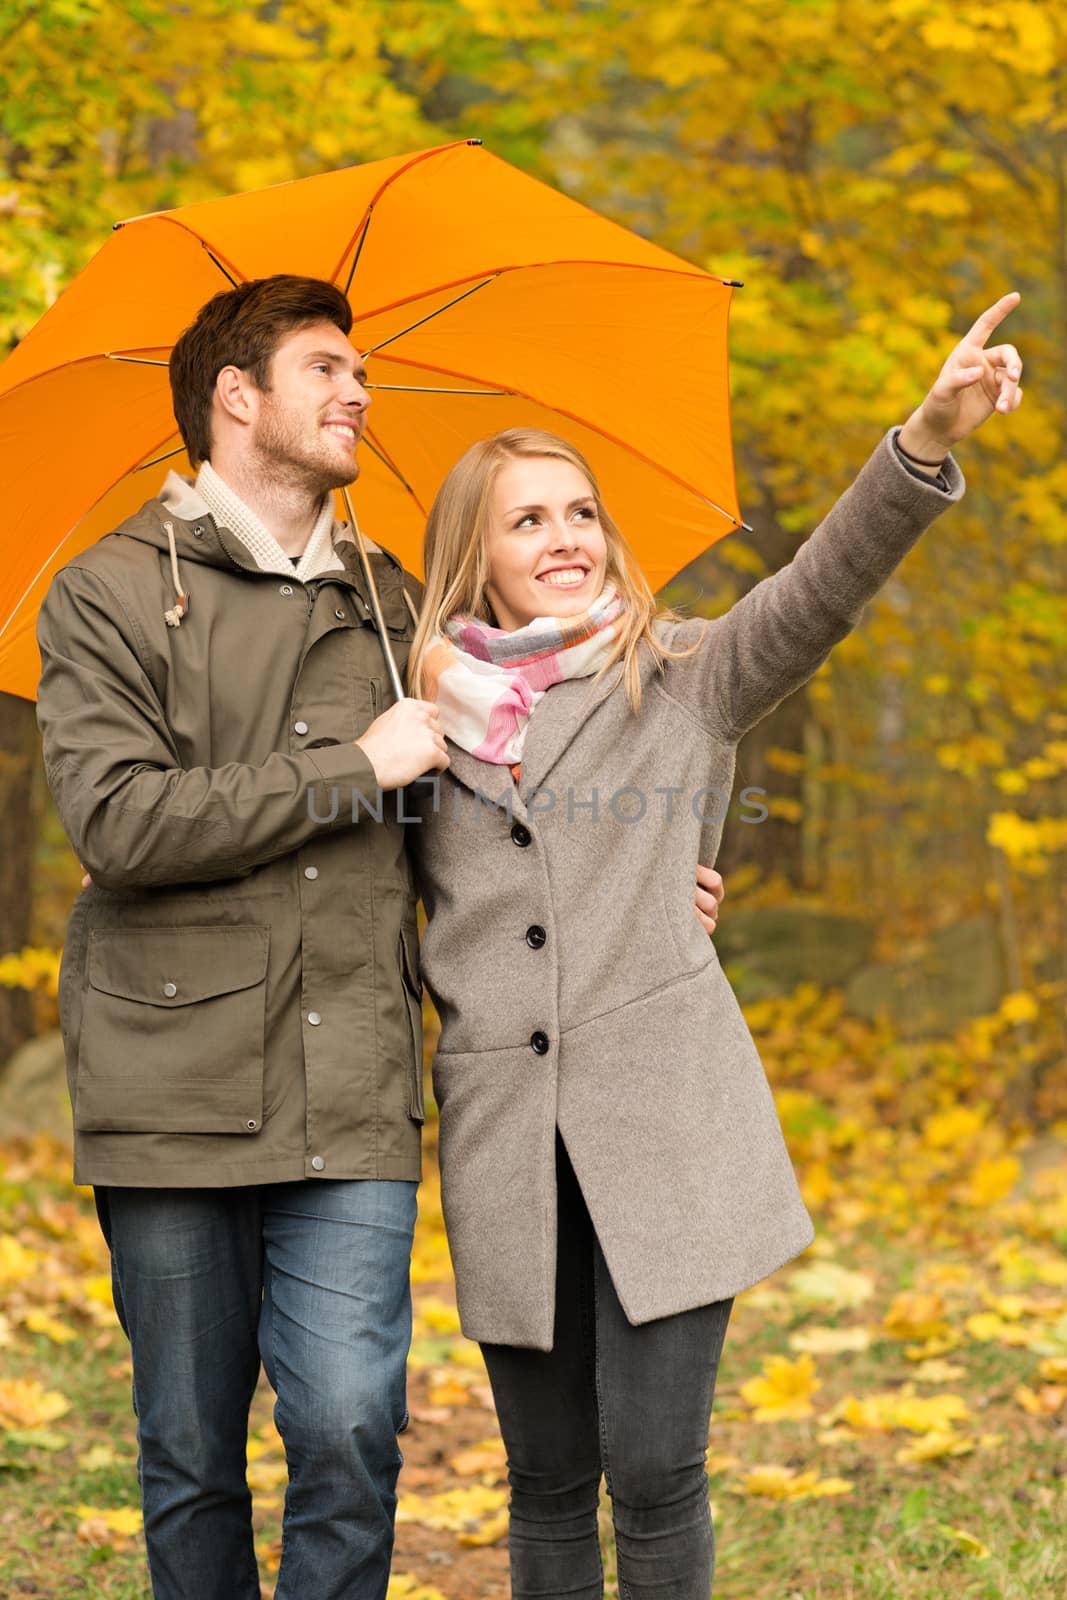 love, season, family, gesture and people concept - smiling couple with umbrella walking and pointing finger in autumn park